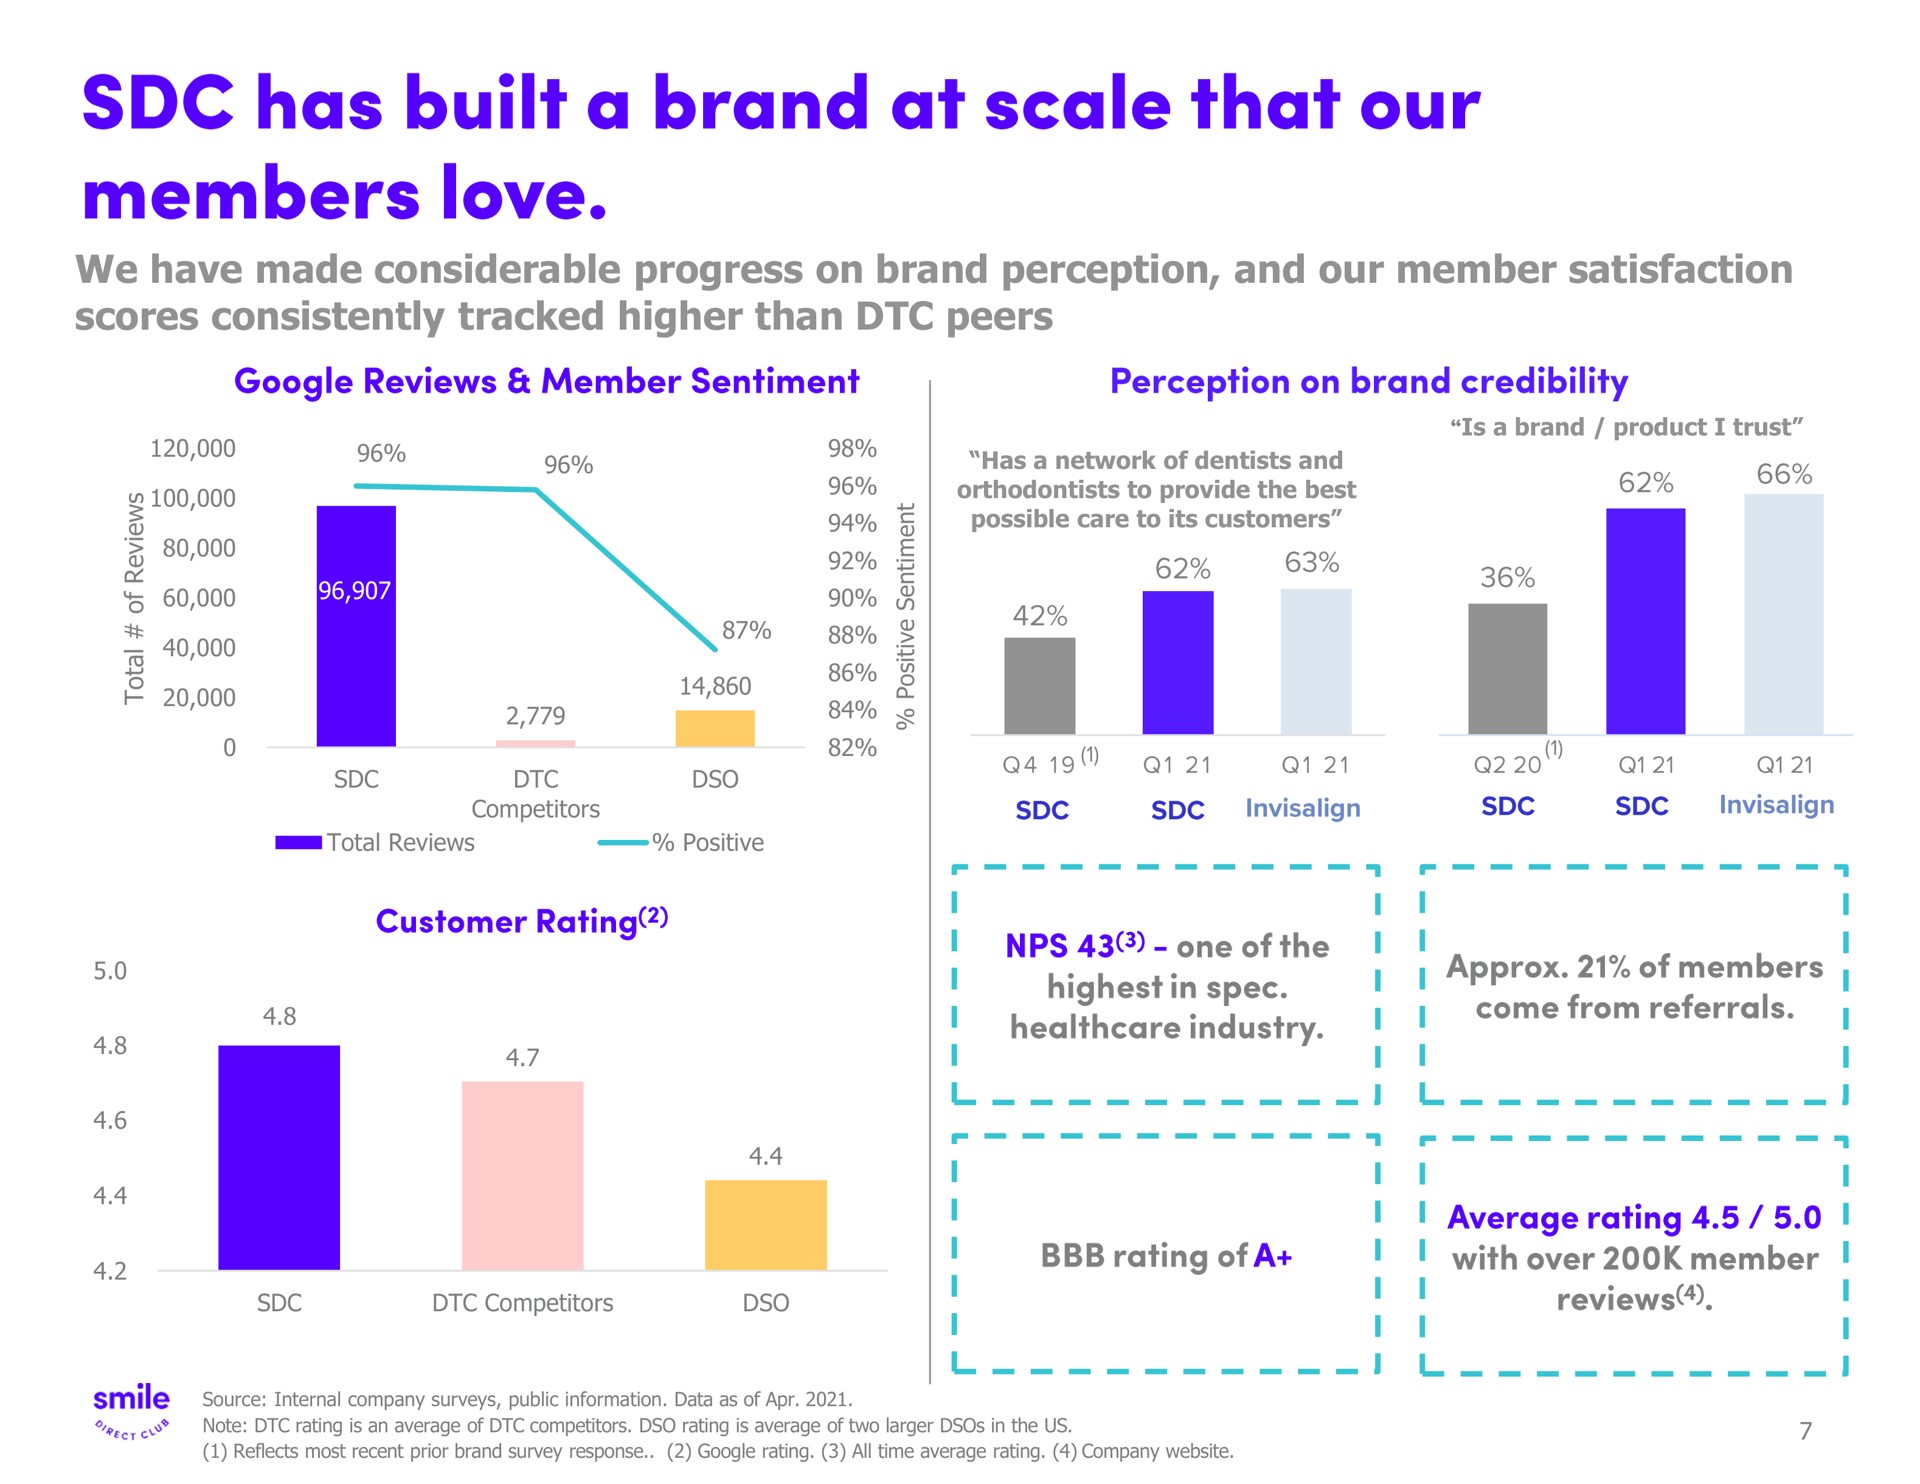 we have made considerable progress on brand perception and our member satisfaction scores consistently tracked higher than peers has built a at scale that members love | SmileDirectClub